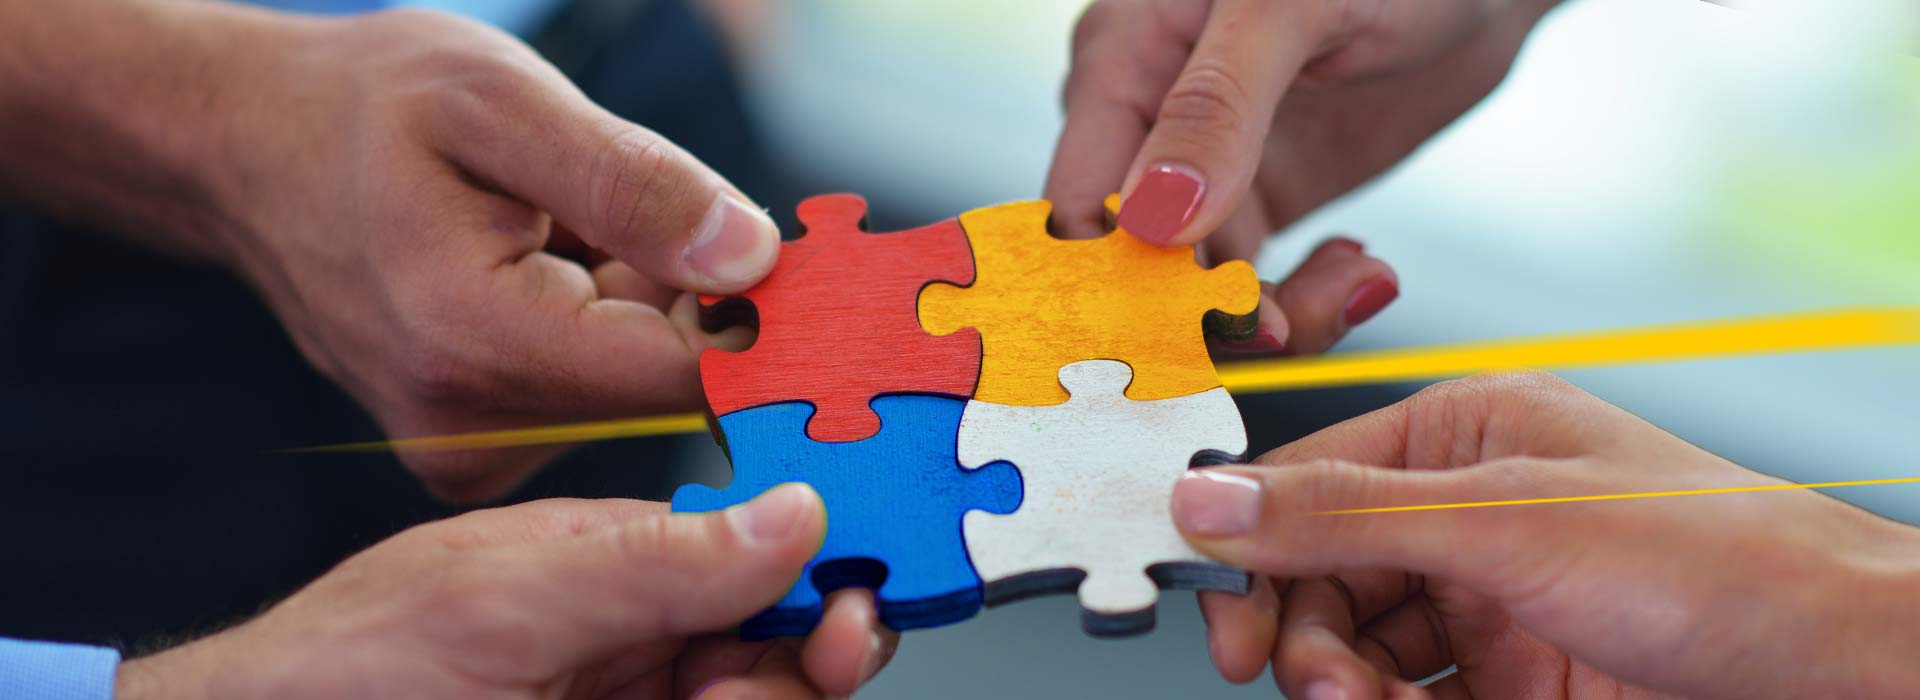 People lift puzzle pieces together | LGI